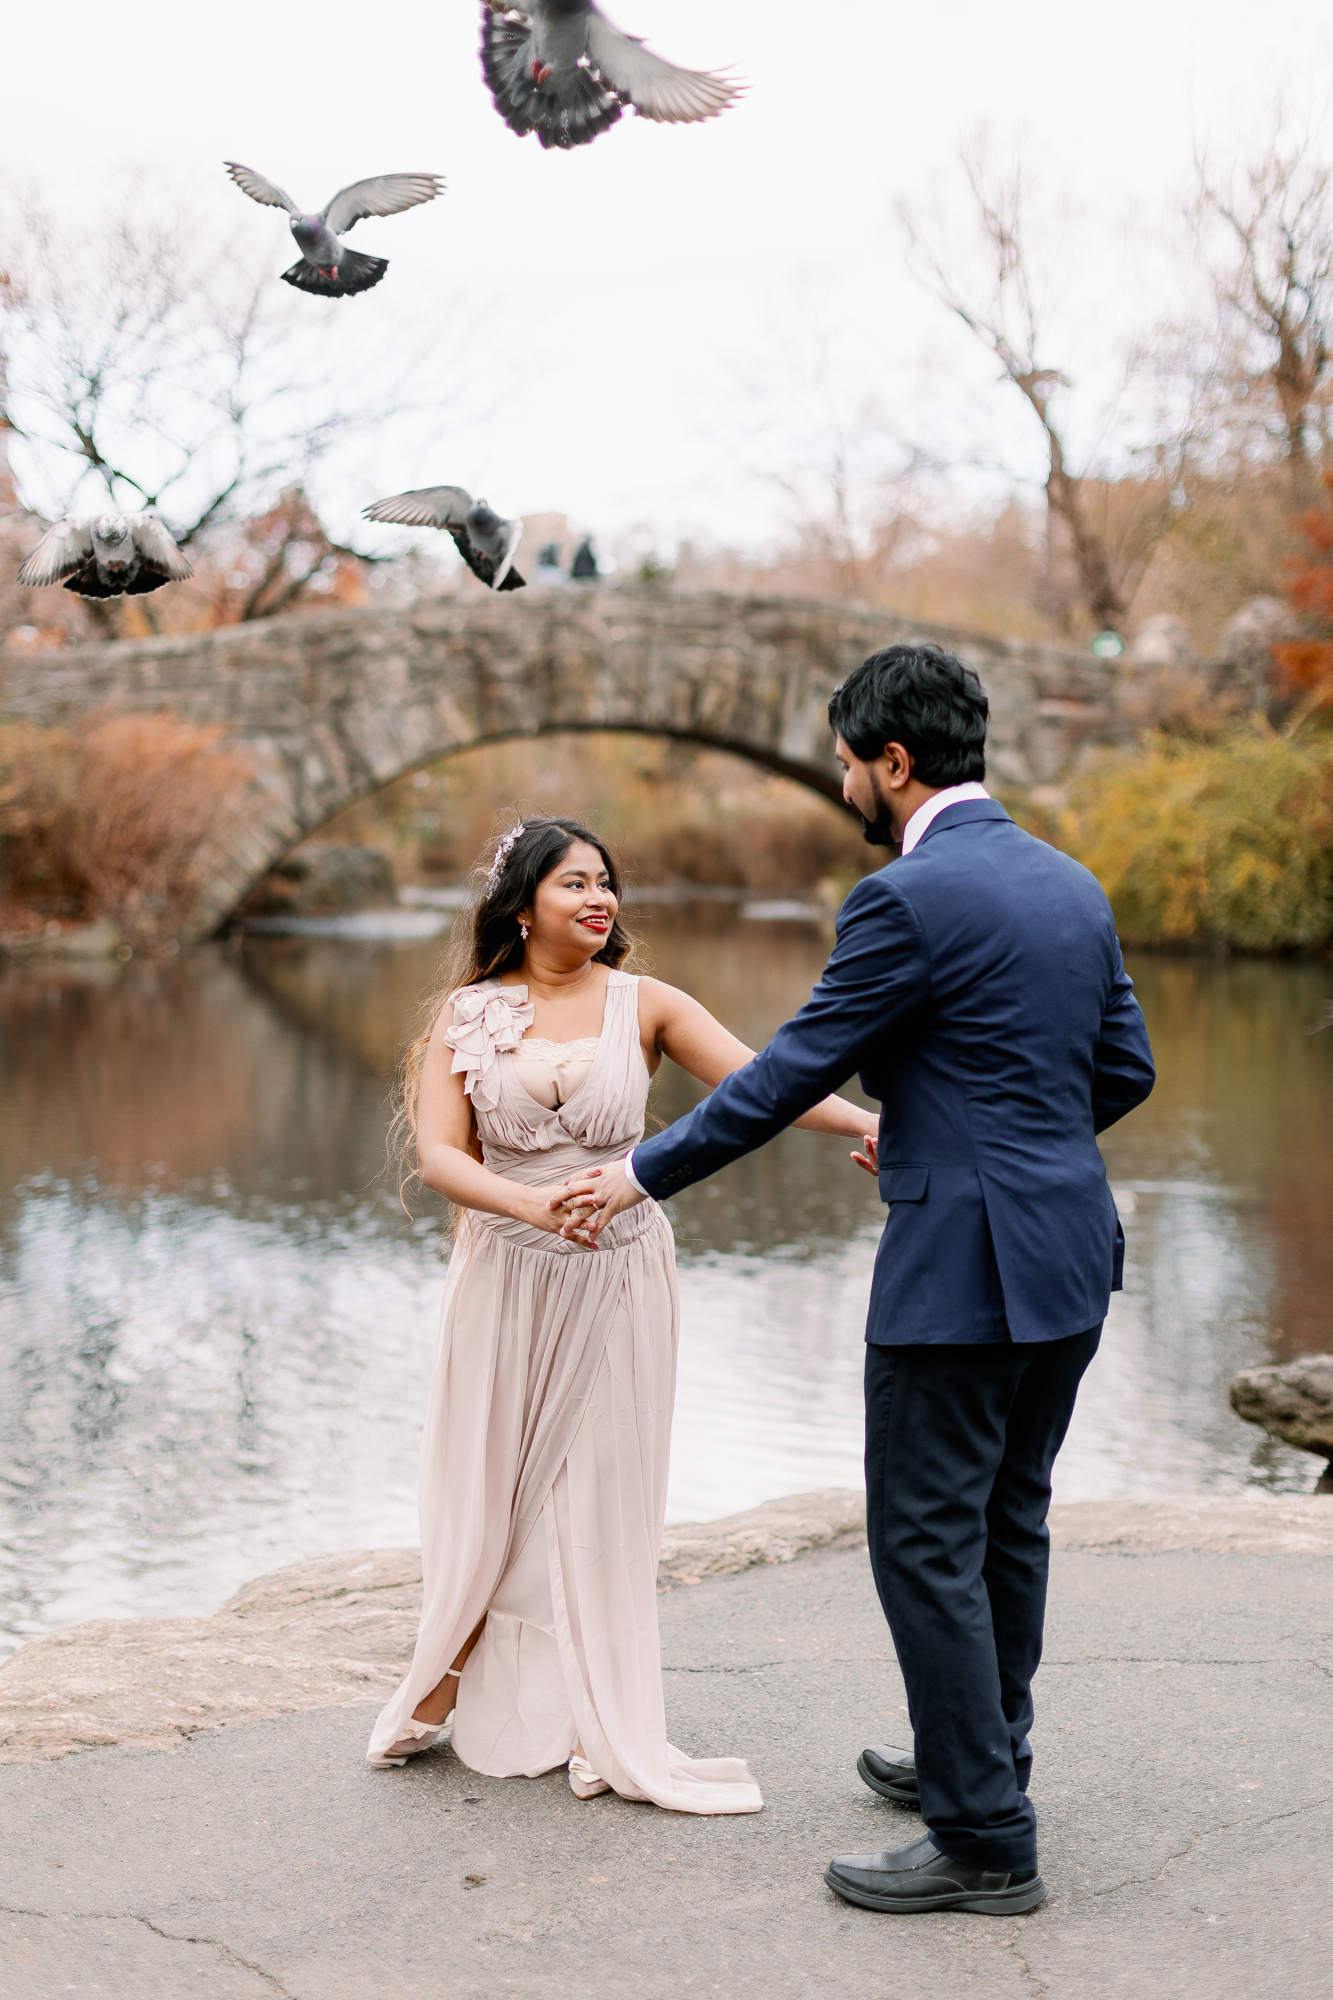 Stunning Central Park elopement locations